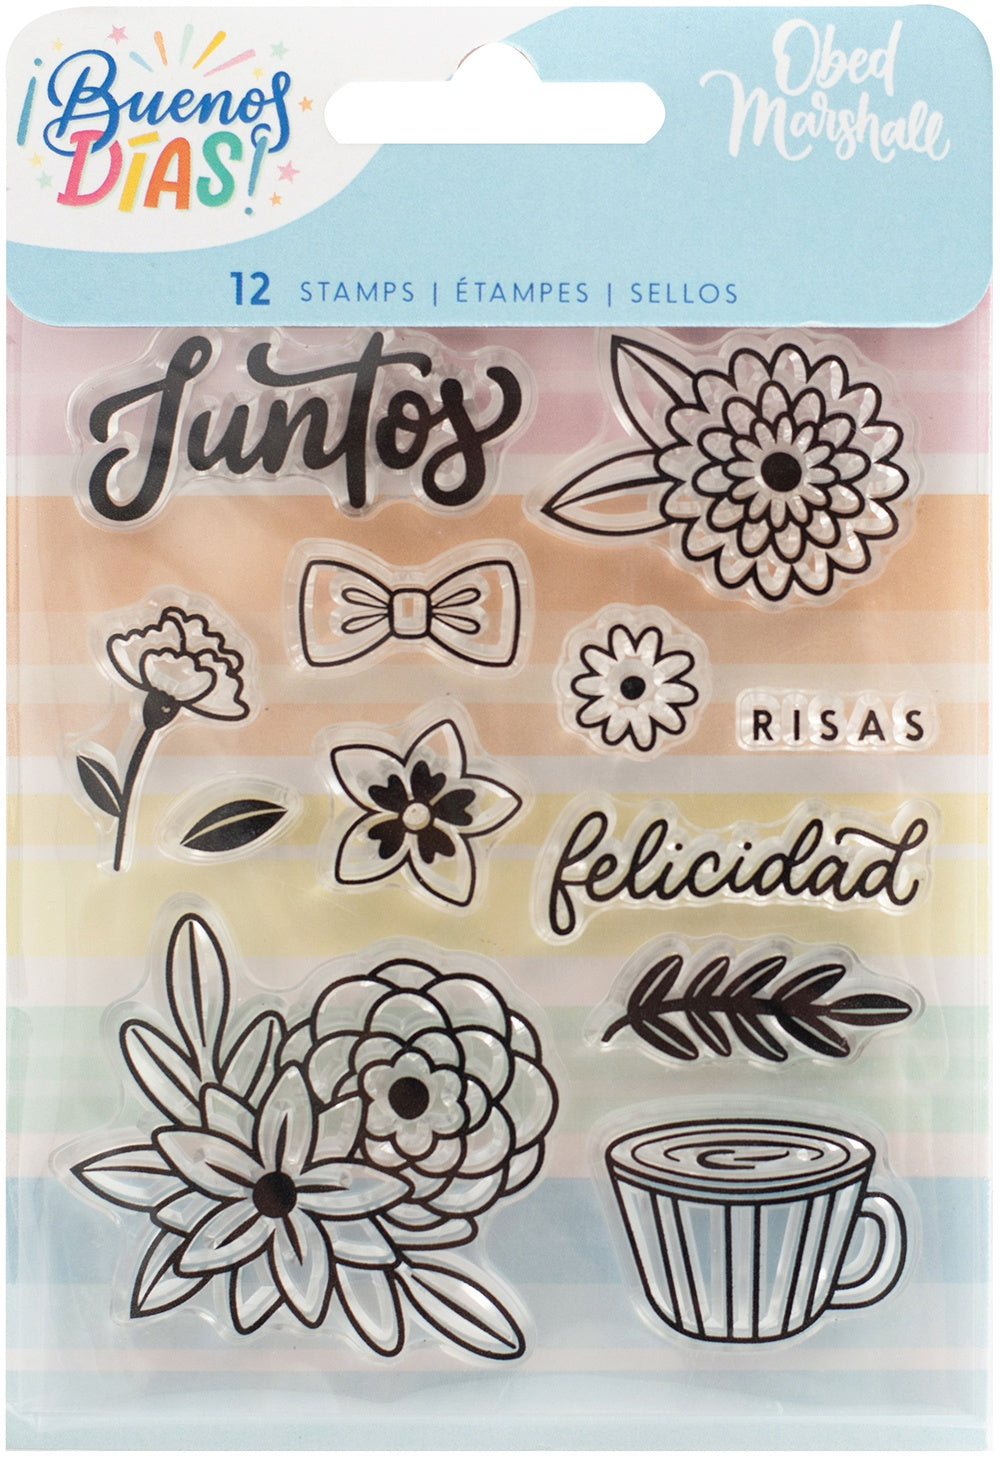 Obed Marshall Buenos Dias Acrylic Stamps 12/Pkg